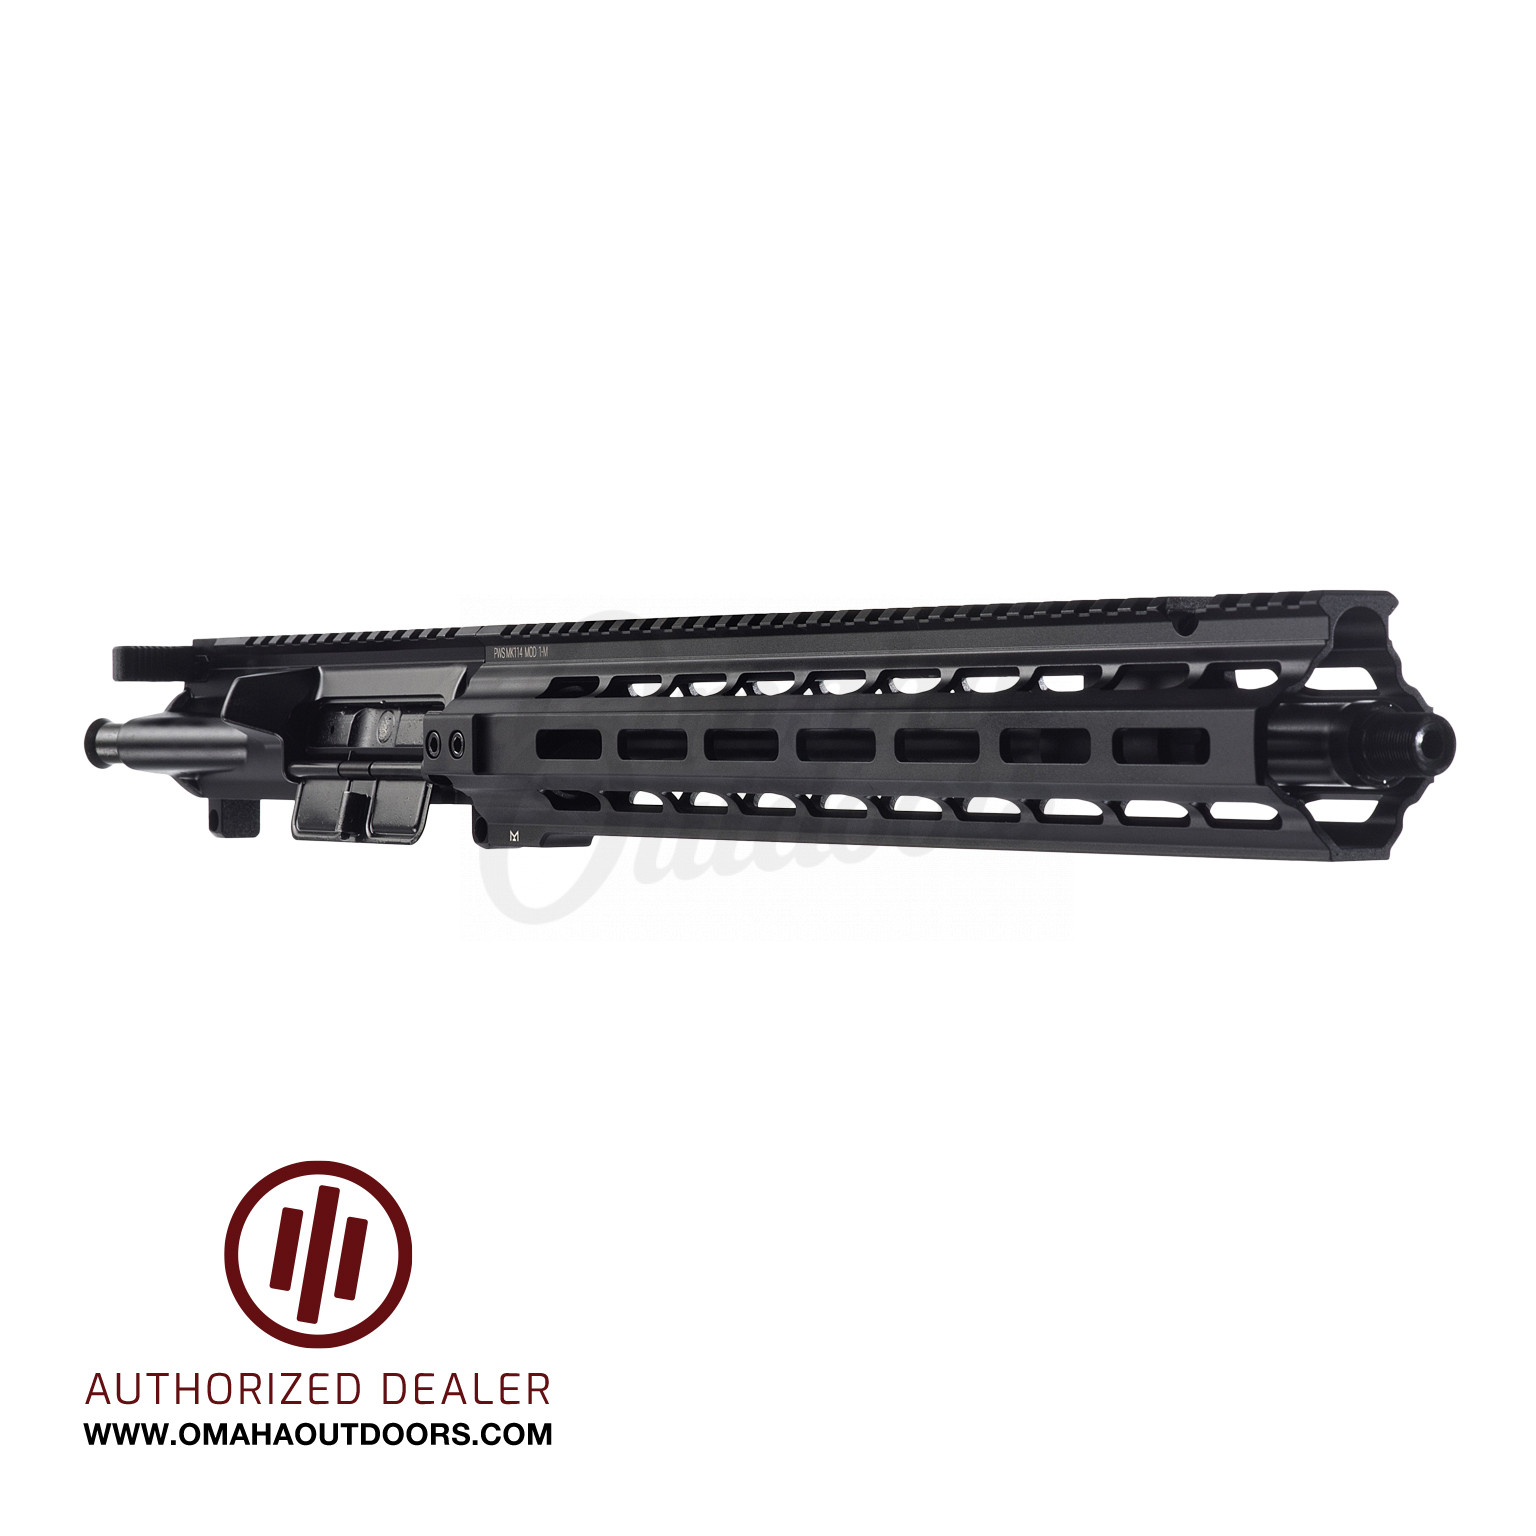 PWS MK114 MOD 1 Upper – No Comp - Primary Weapons Systems